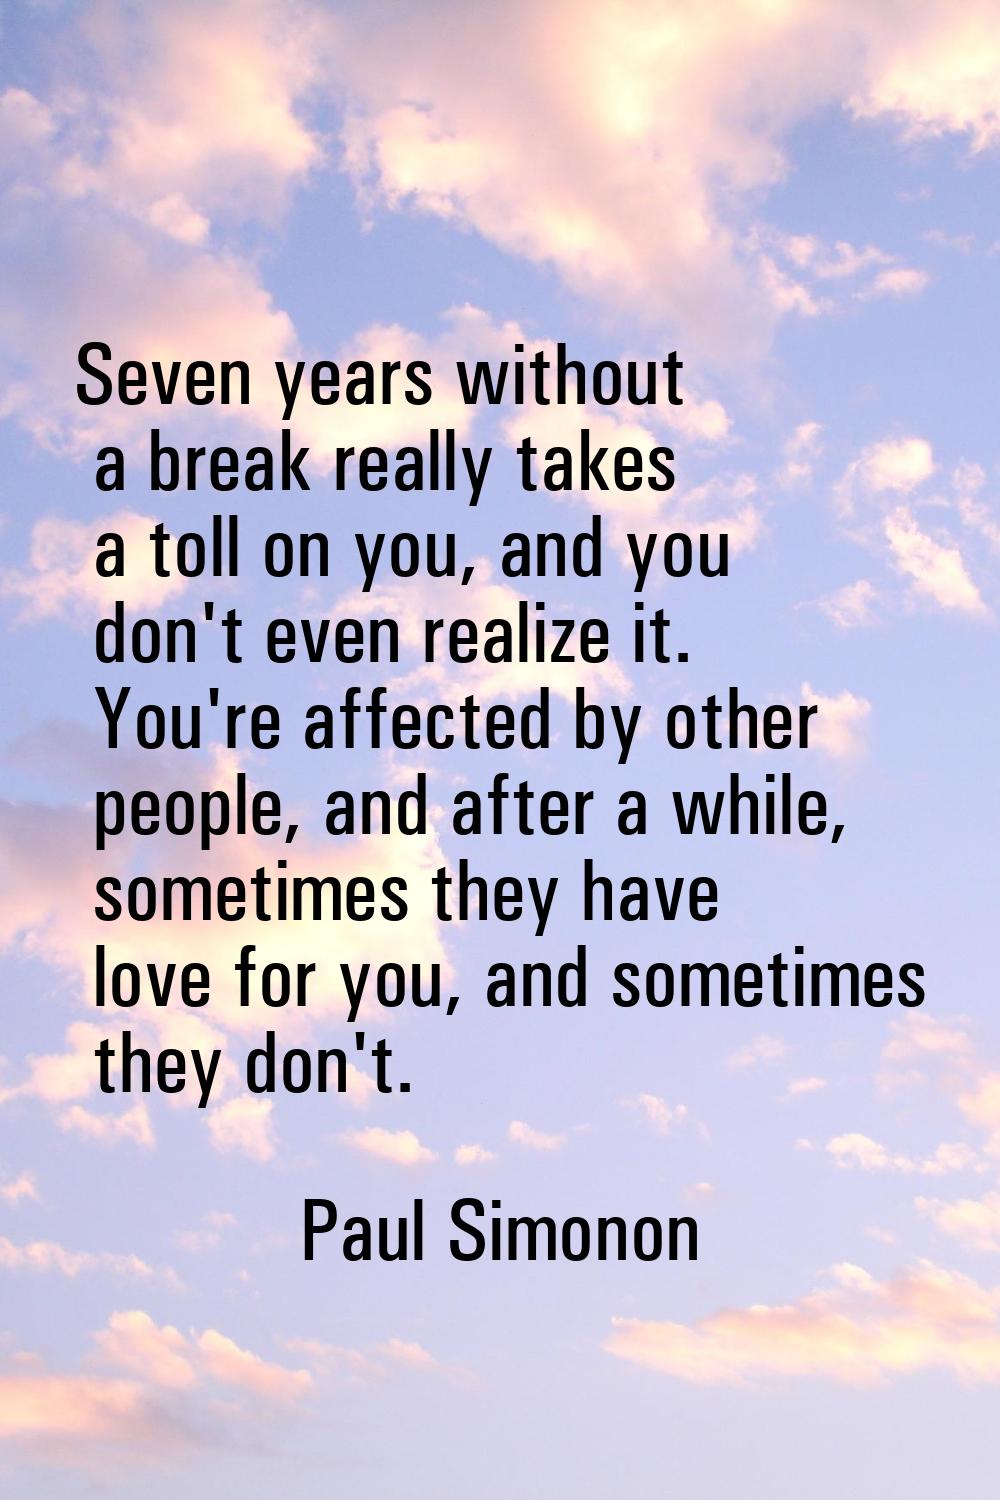 Seven years without a break really takes a toll on you, and you don't even realize it. You're affec